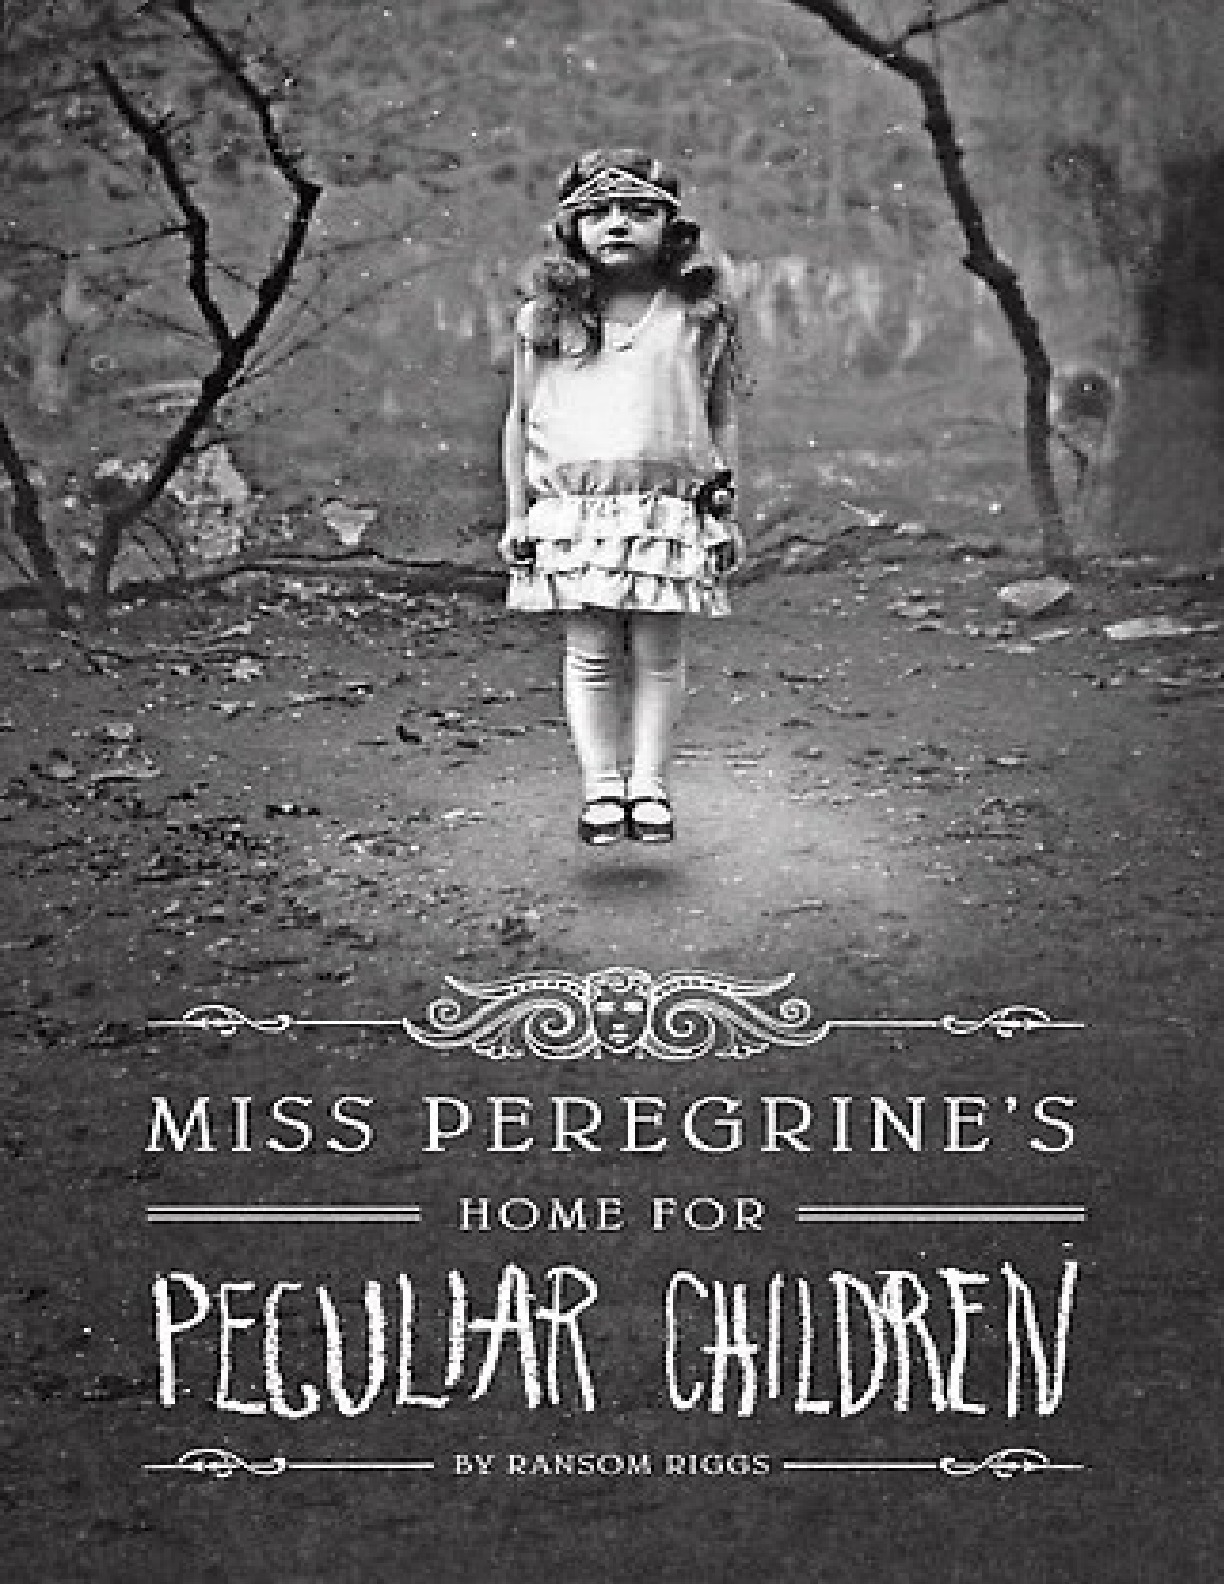 Miss Peregrine’s Home for Peculiar Children – Ransom Riggs